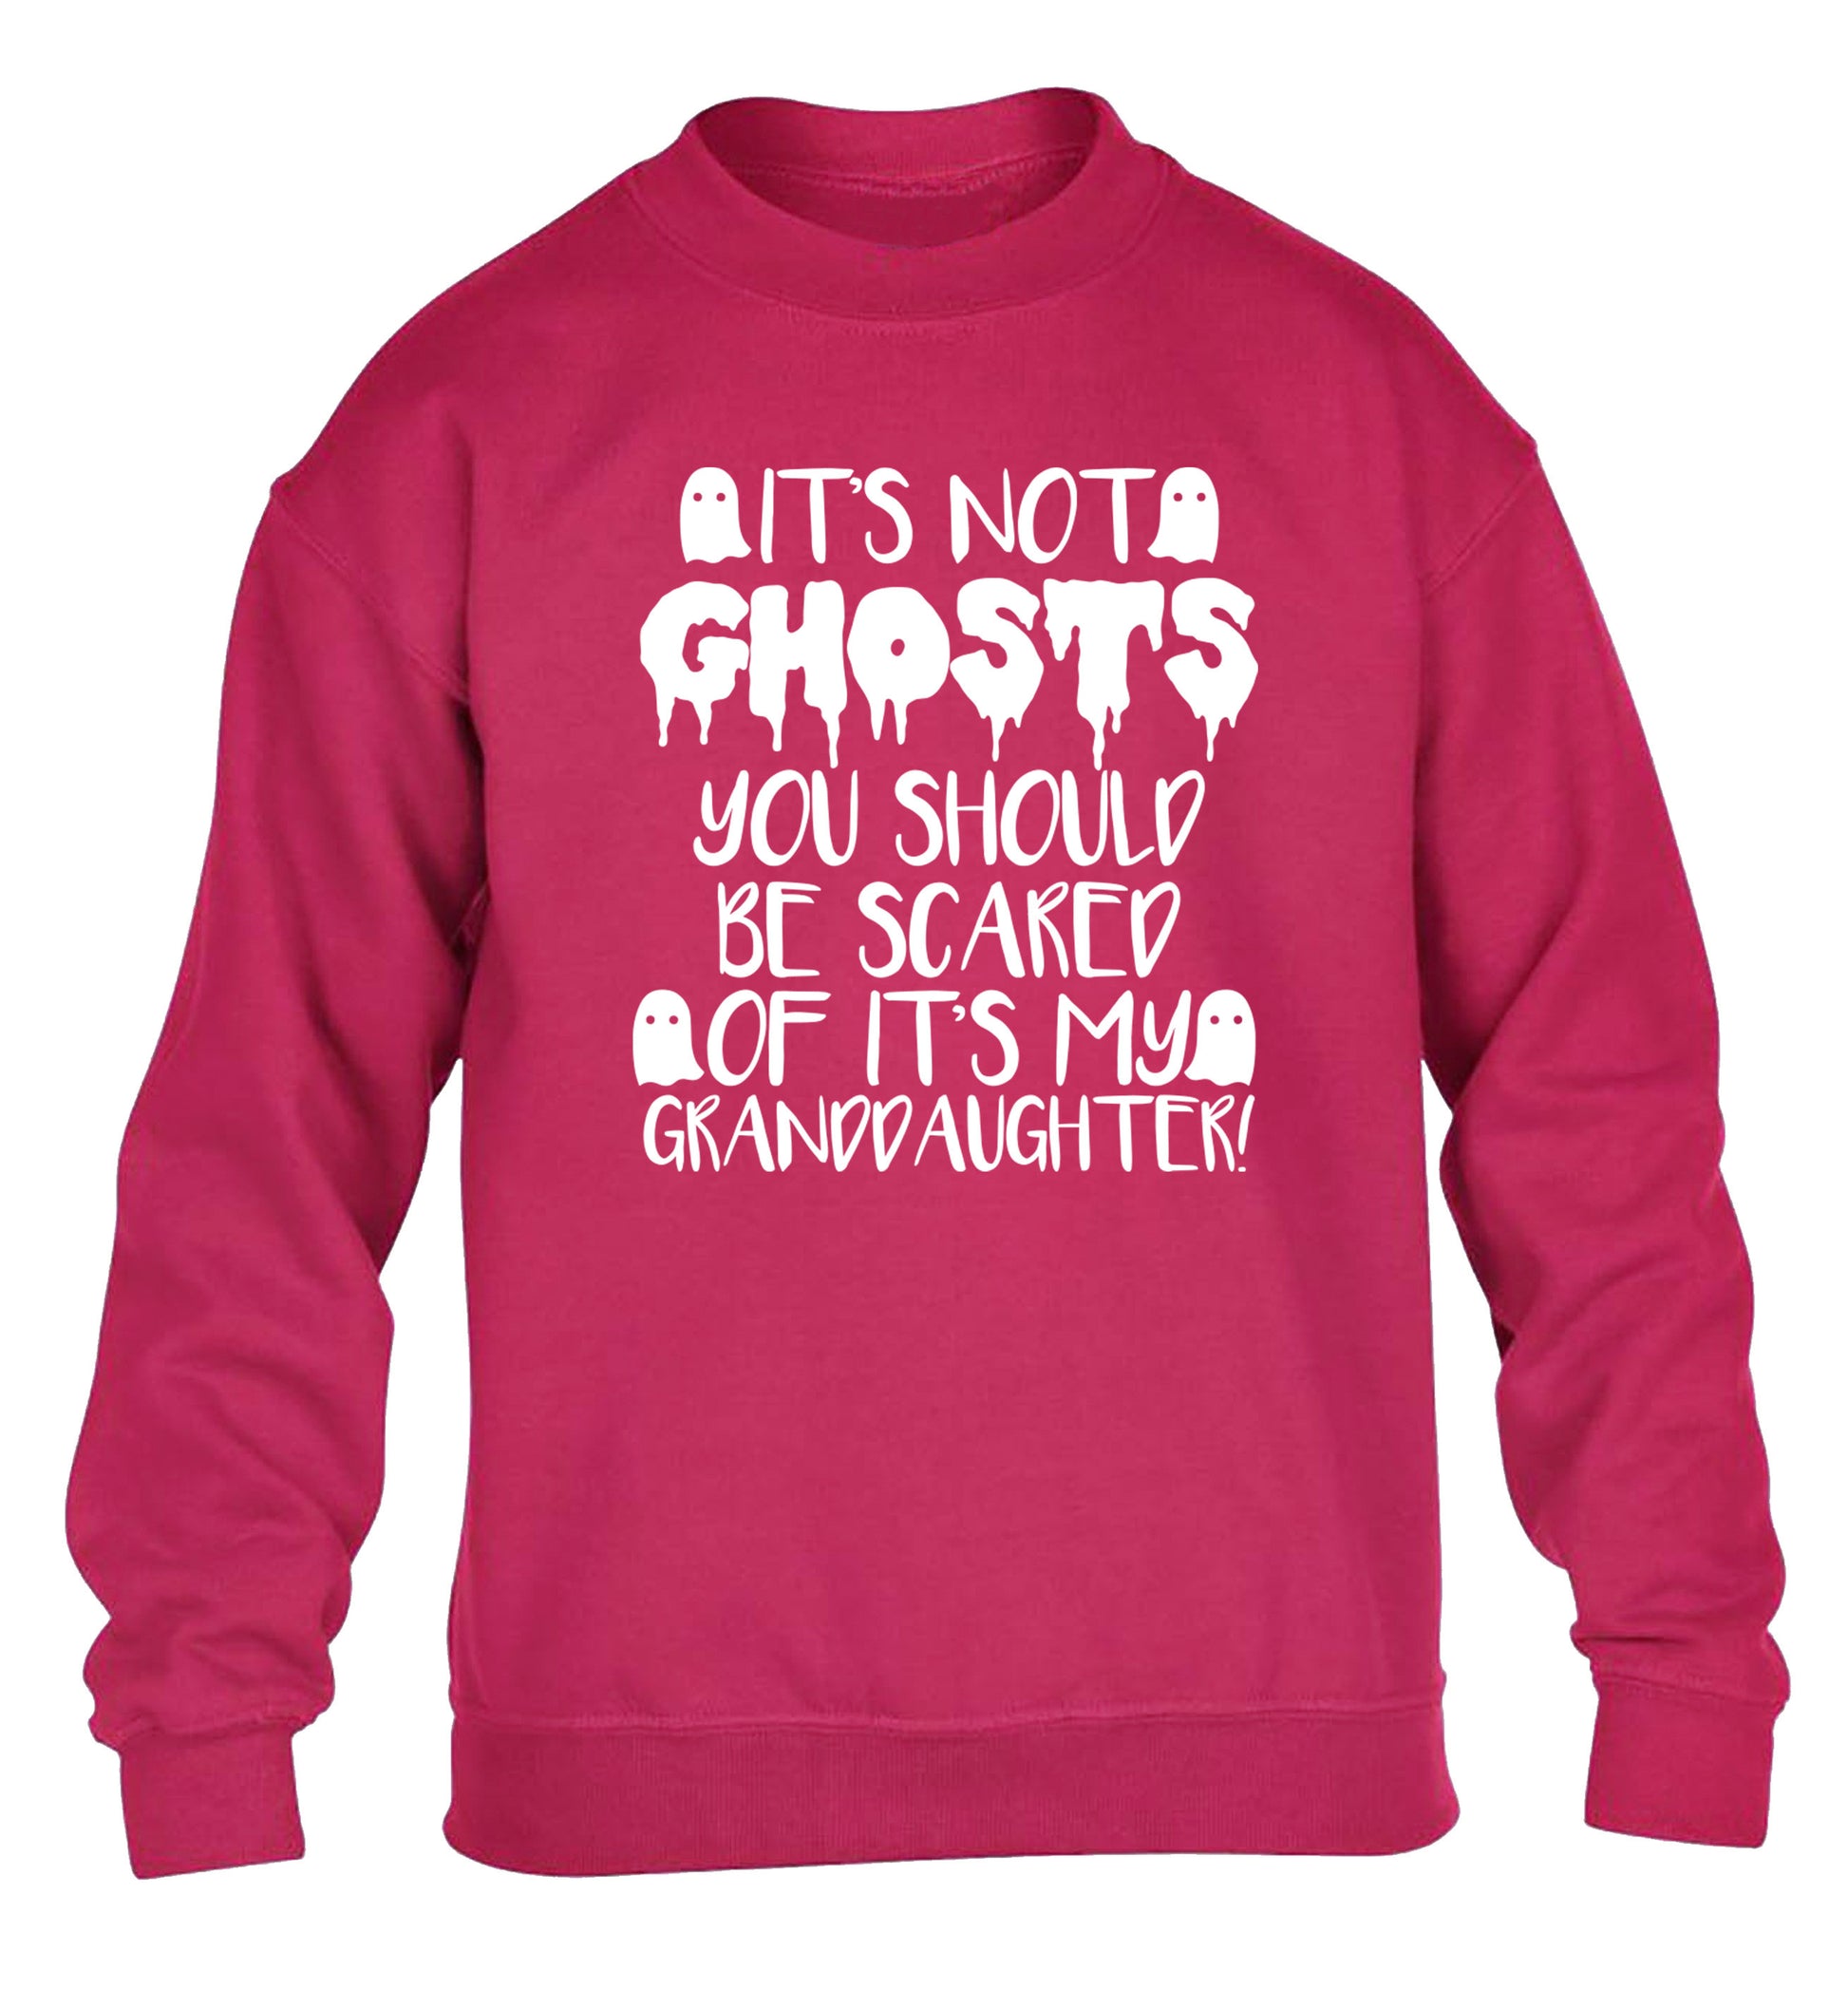 It's not ghosts you should be scared of it's my granddaughter! children's pink sweater 12-14 Years